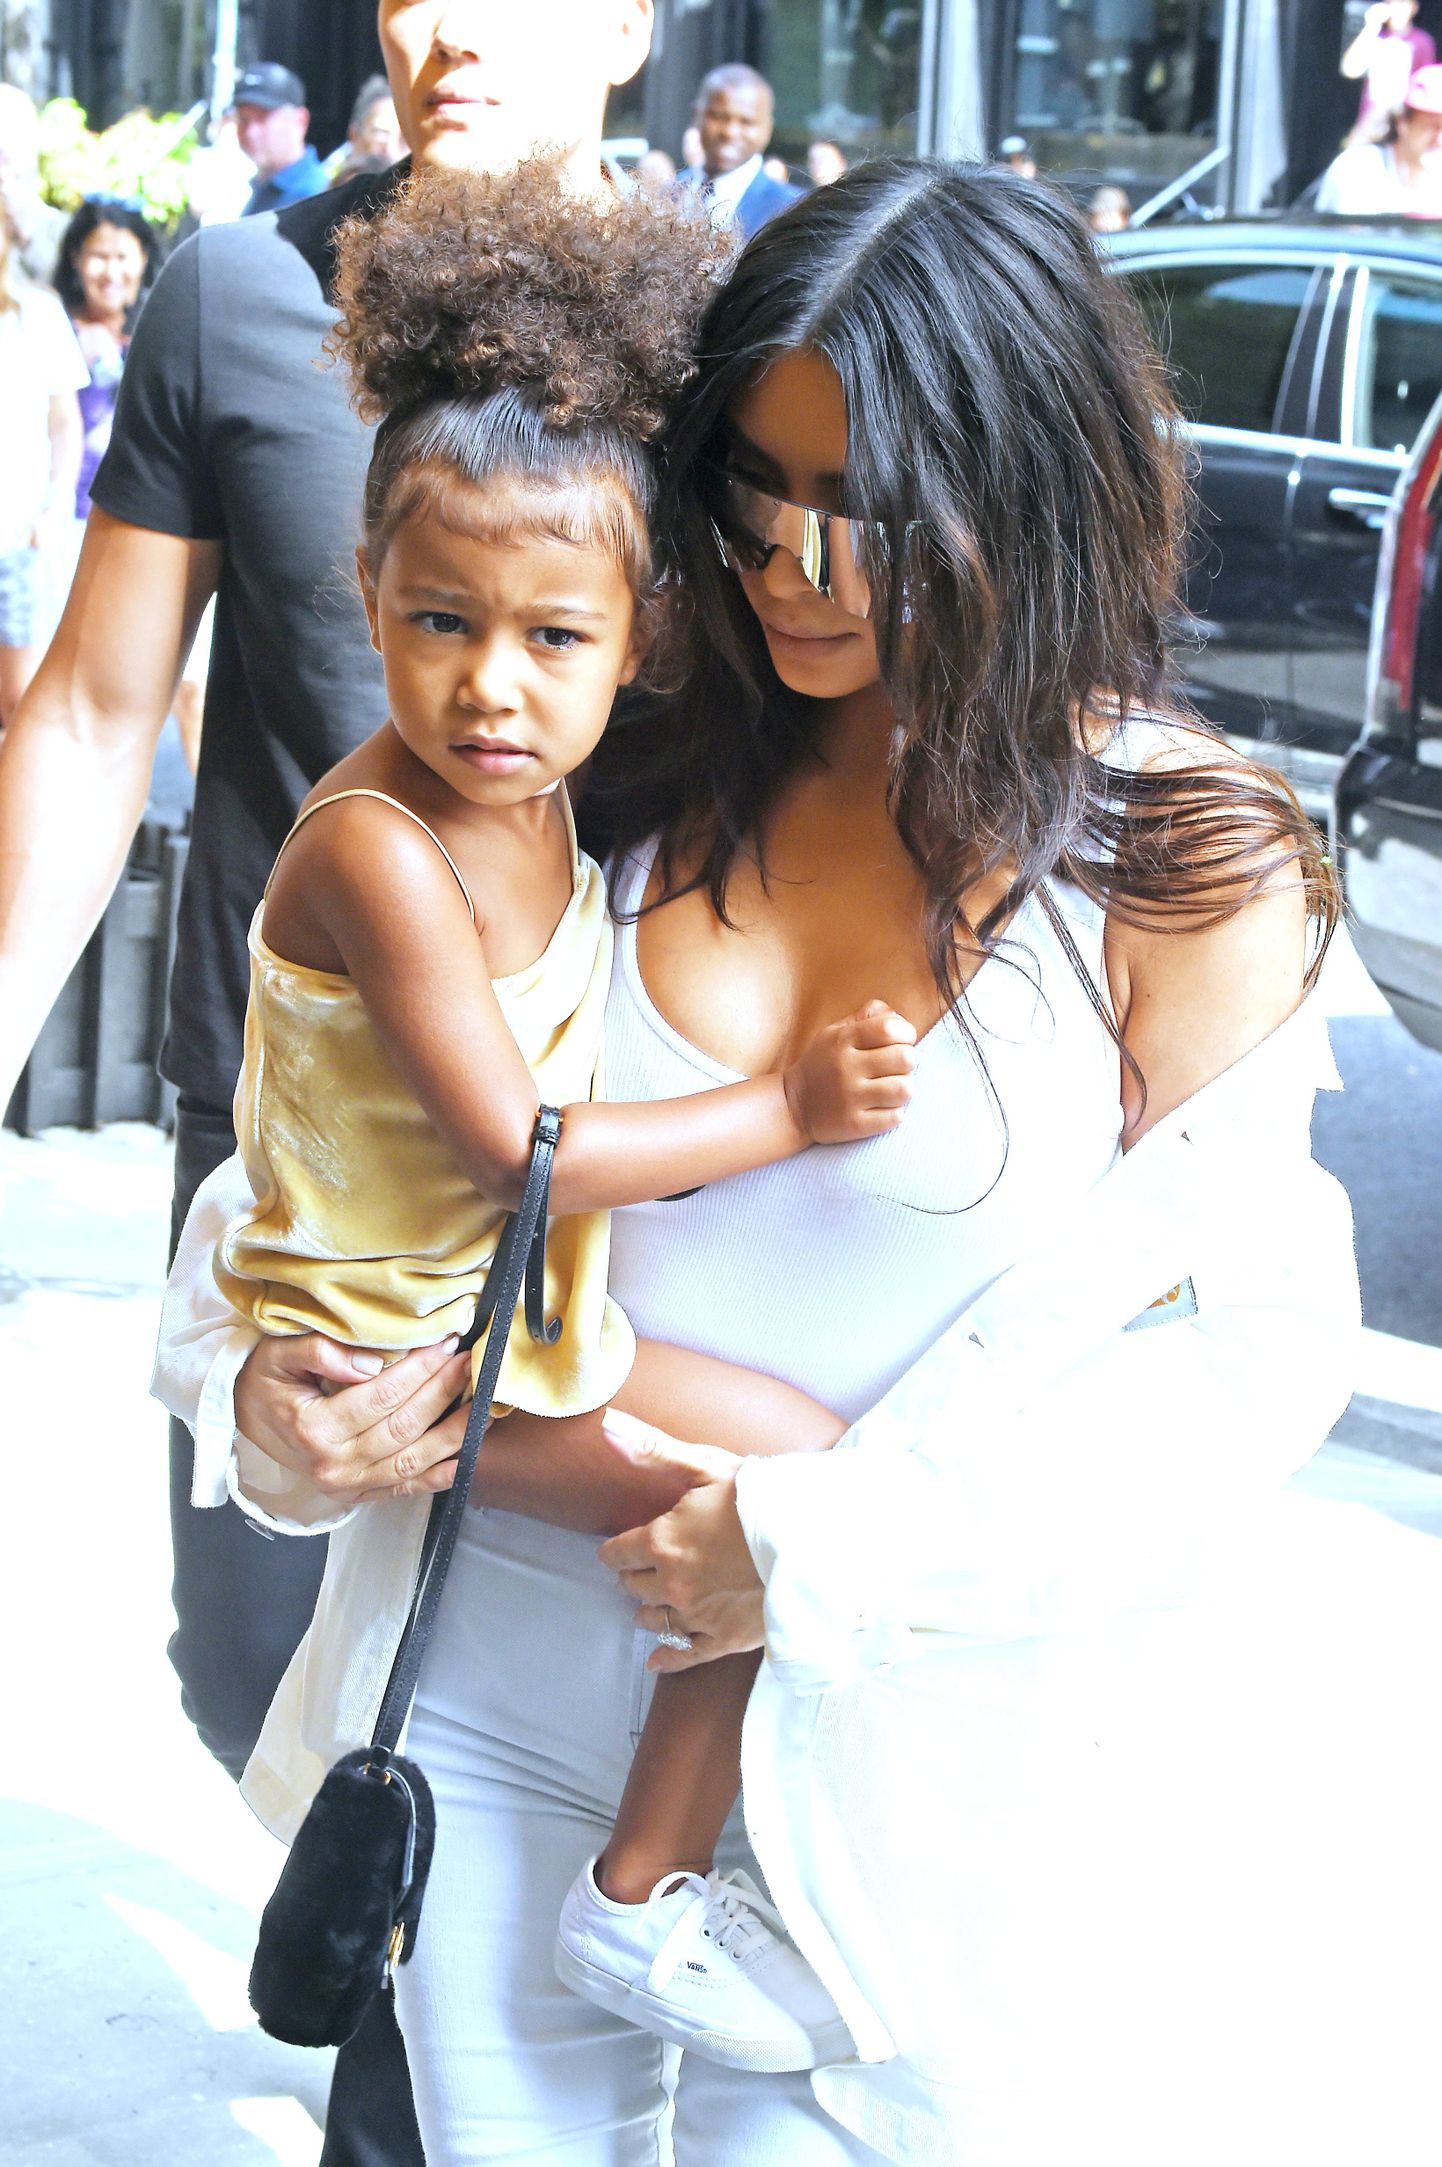 MANHATTAN, NY - SEPTEMBER 02, 2016: Kim Kardashian and daughter North West are seen at there favorite Restaurant Cipriani Downtown on SEPTEMBER 02, 2016 in New York
(Photo By Josiah Kamau / BuzzFoto.com)

Buzz Foto LLC 
httpwww.buzzfoto.com 
1112 Montana Ave suite 80 
Santa Monica CA 90403 
1 310 980 8822 
1 310 691 3888  Local Caption  *** Kim Kardashian, North West